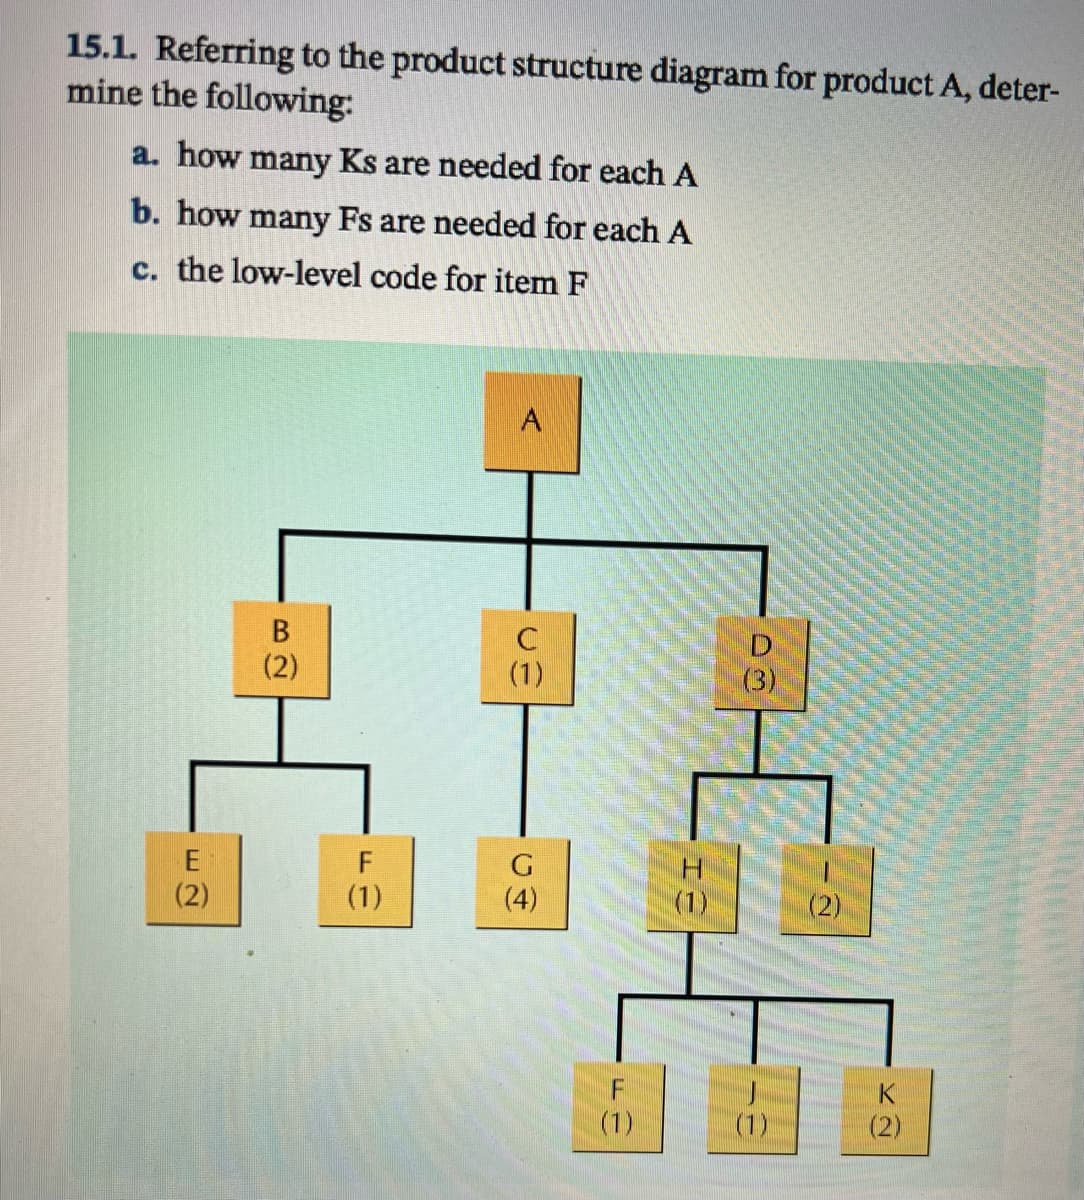 15.1. Referring to the product structure diagram for product A, deter-
mine the following:
a. how many Ks are needed for each A
b. how many Fs are needed for each A
c. the low-level code for item F
A
B
C
(2)
(1)
(3)
F
G
(2)
(1)
(4)
(2)
K
(1)
(2)
